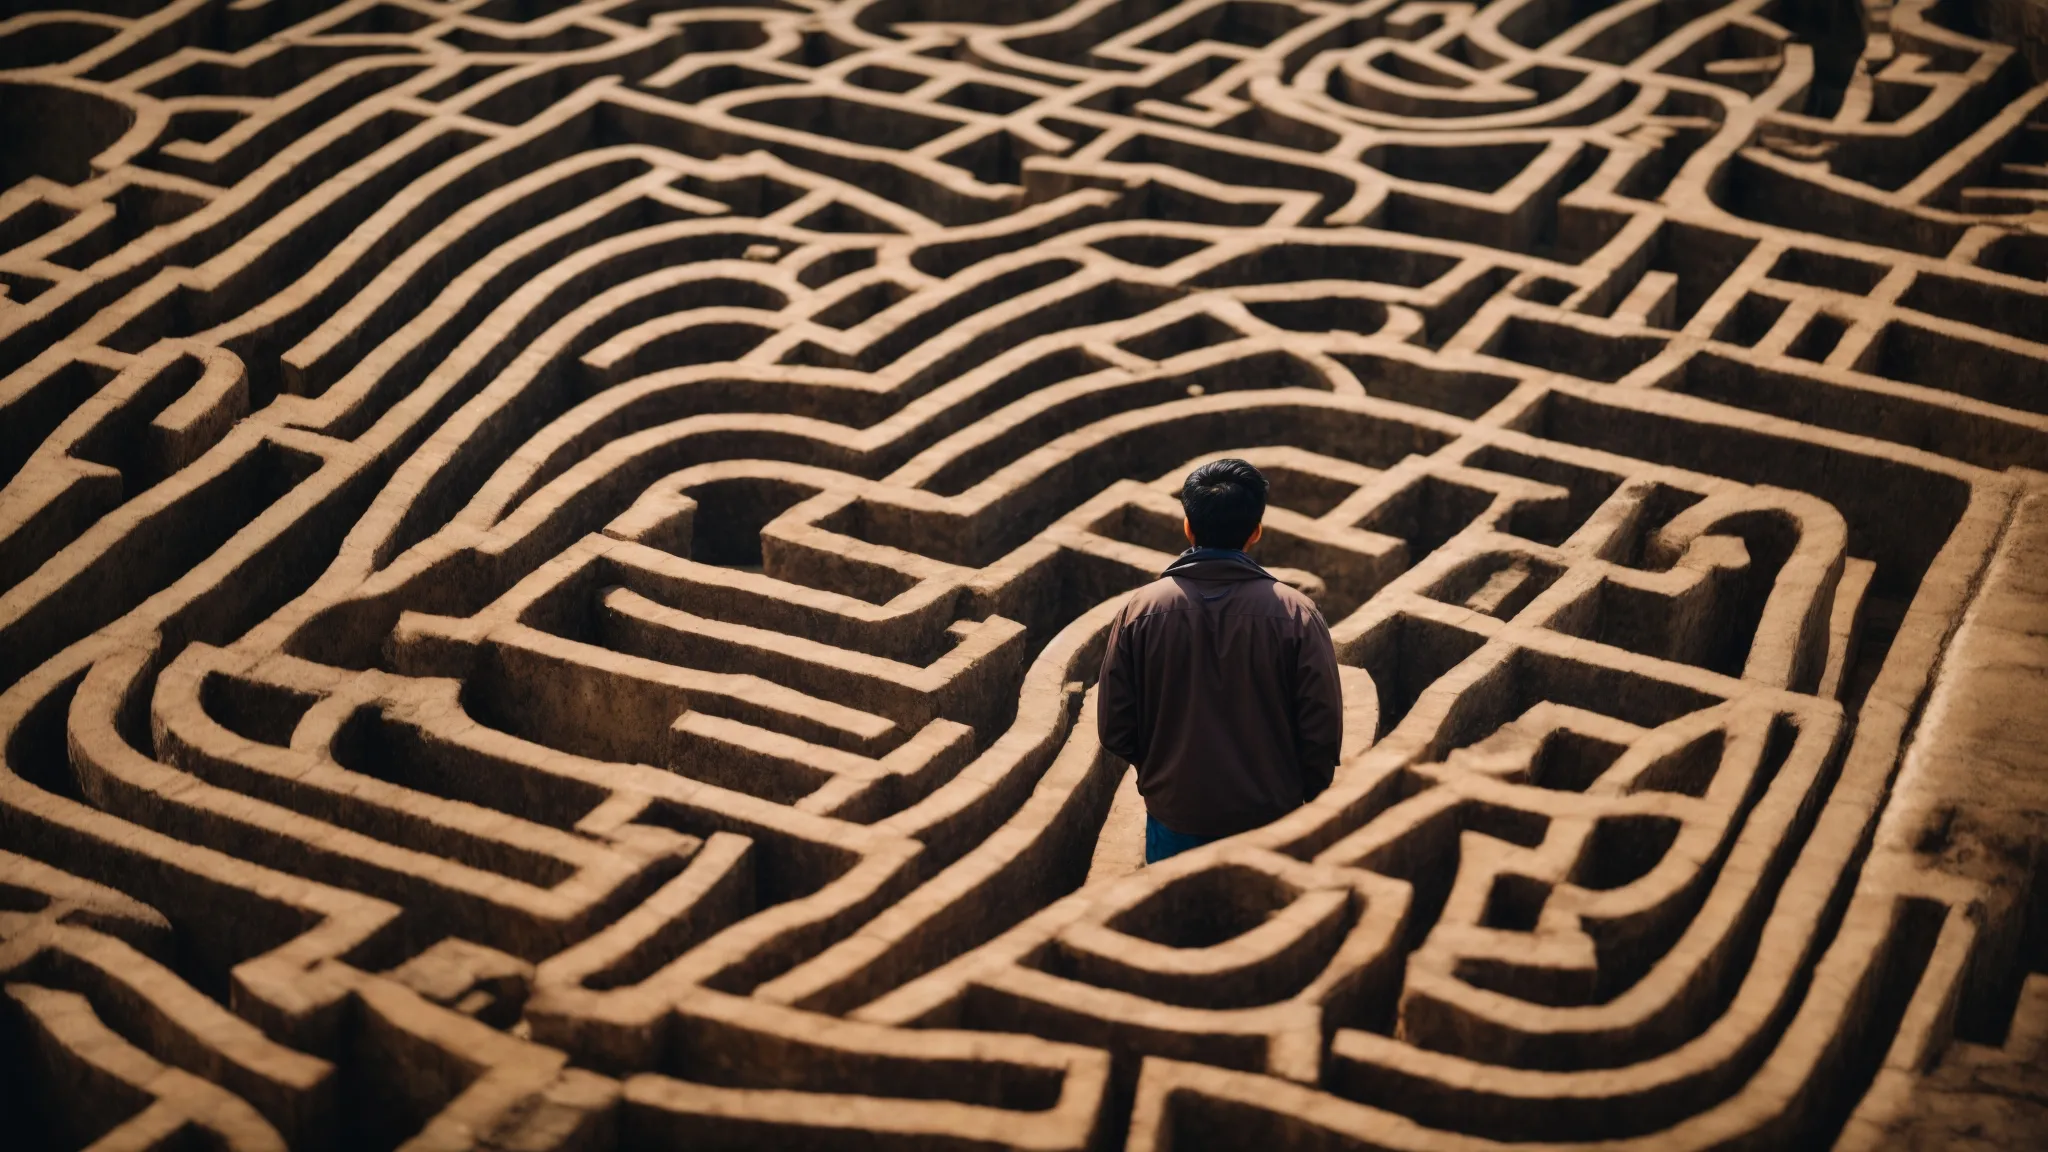 a person intently examining a large, intricate maze from above, searching for a hidden path.